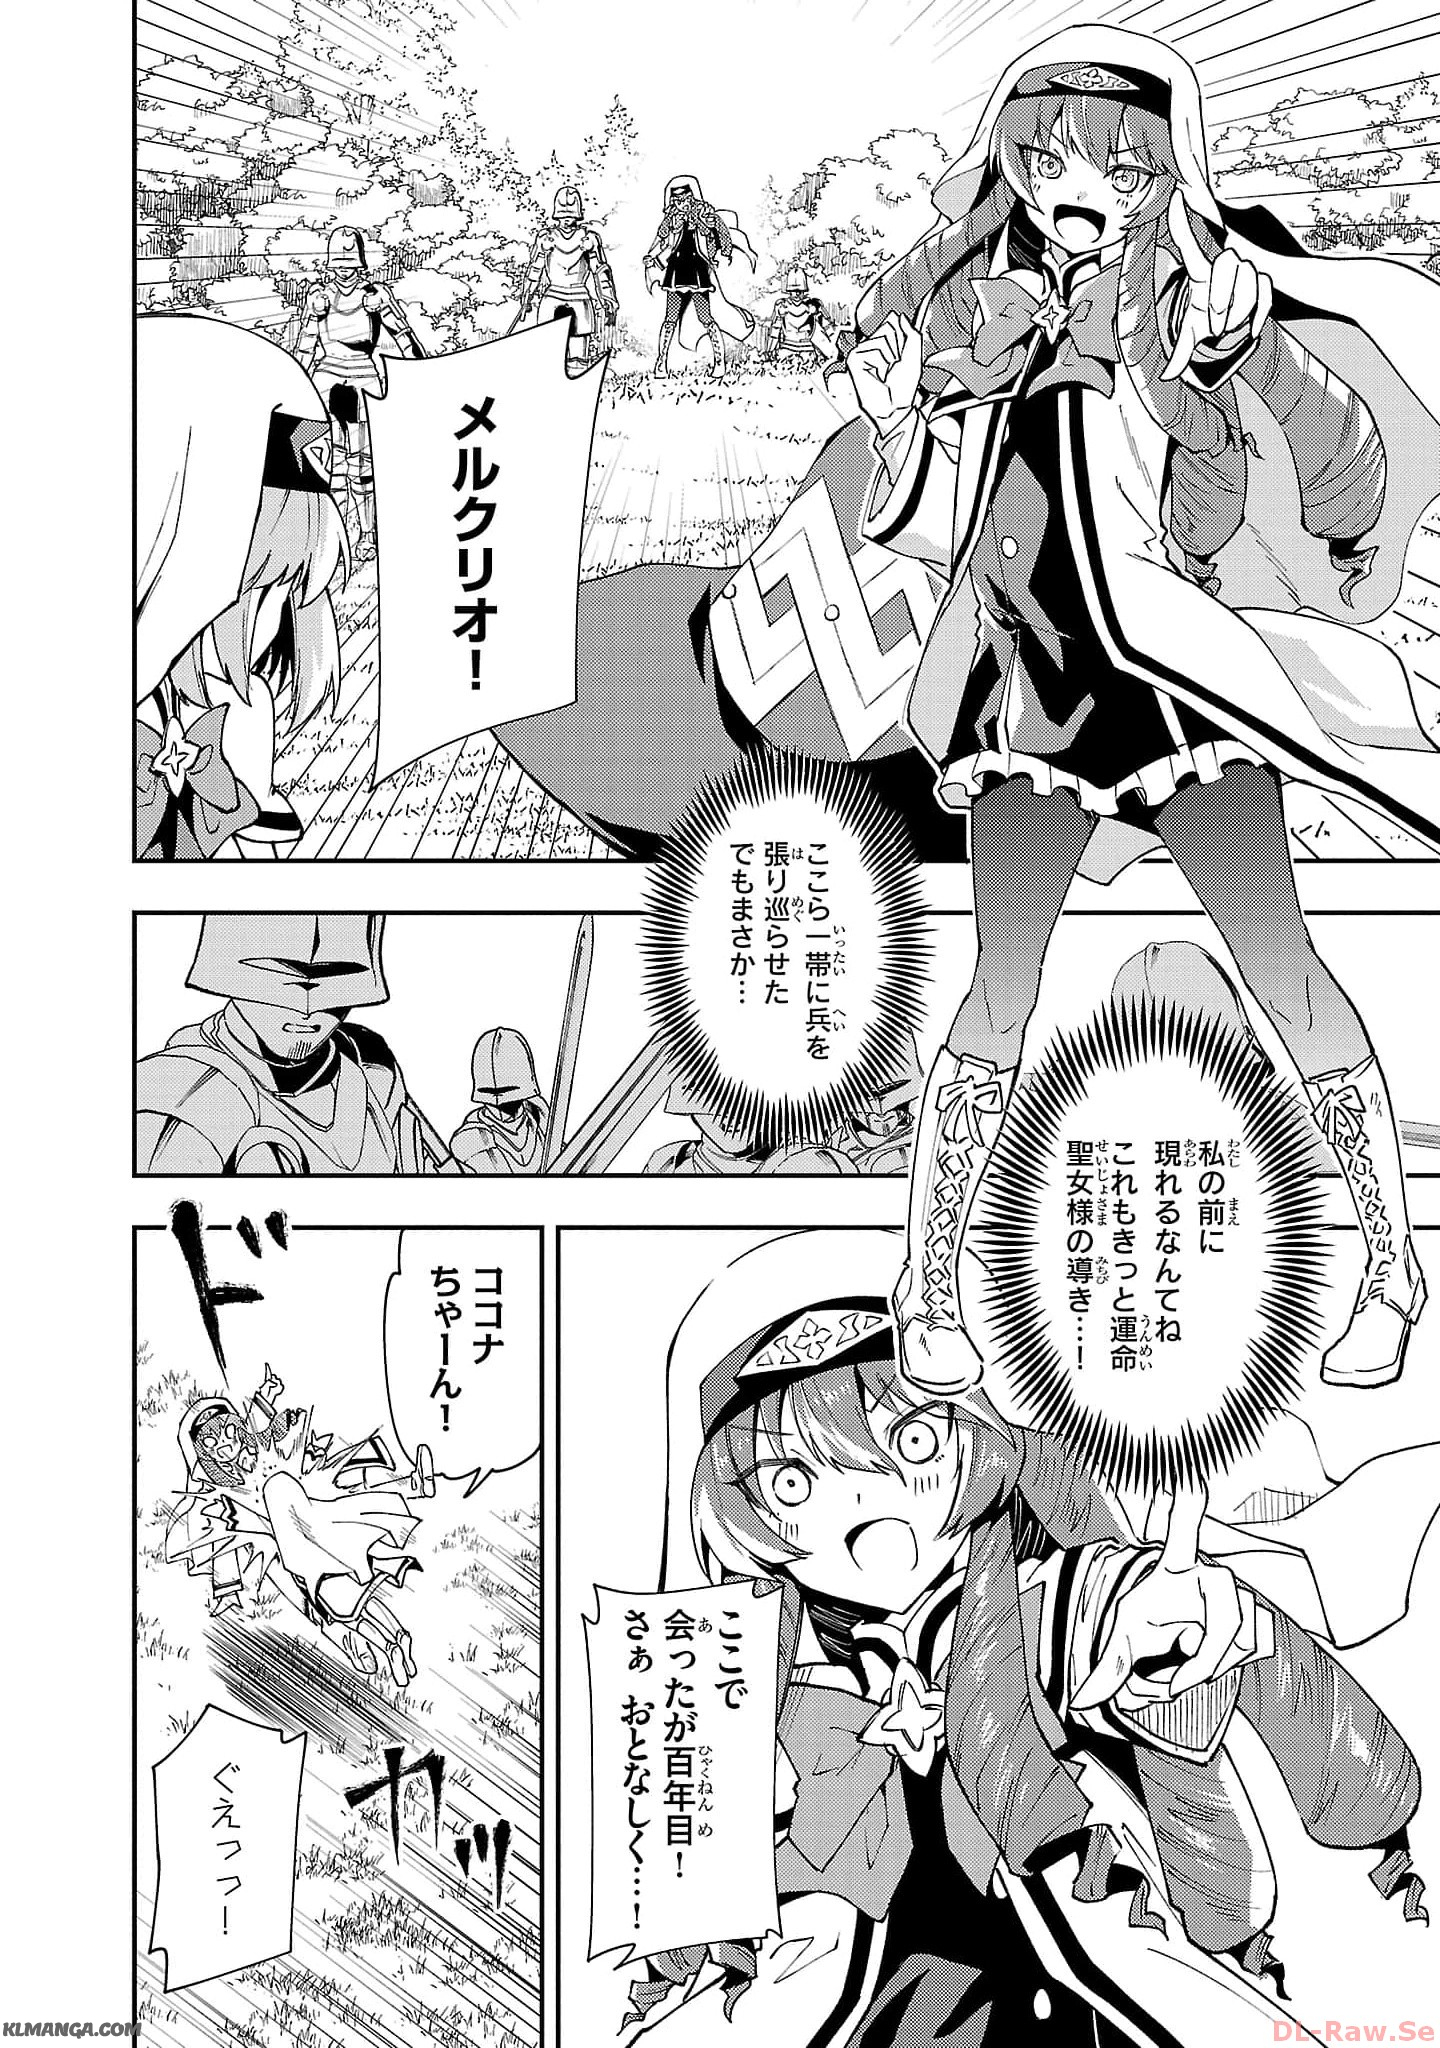 Hungry Saint and Full-Stomach Witch’s Slow Life in Another World! 腹ペコ聖女とまんぷく魔女の異世界スローライフ! 第21話 - Page 12